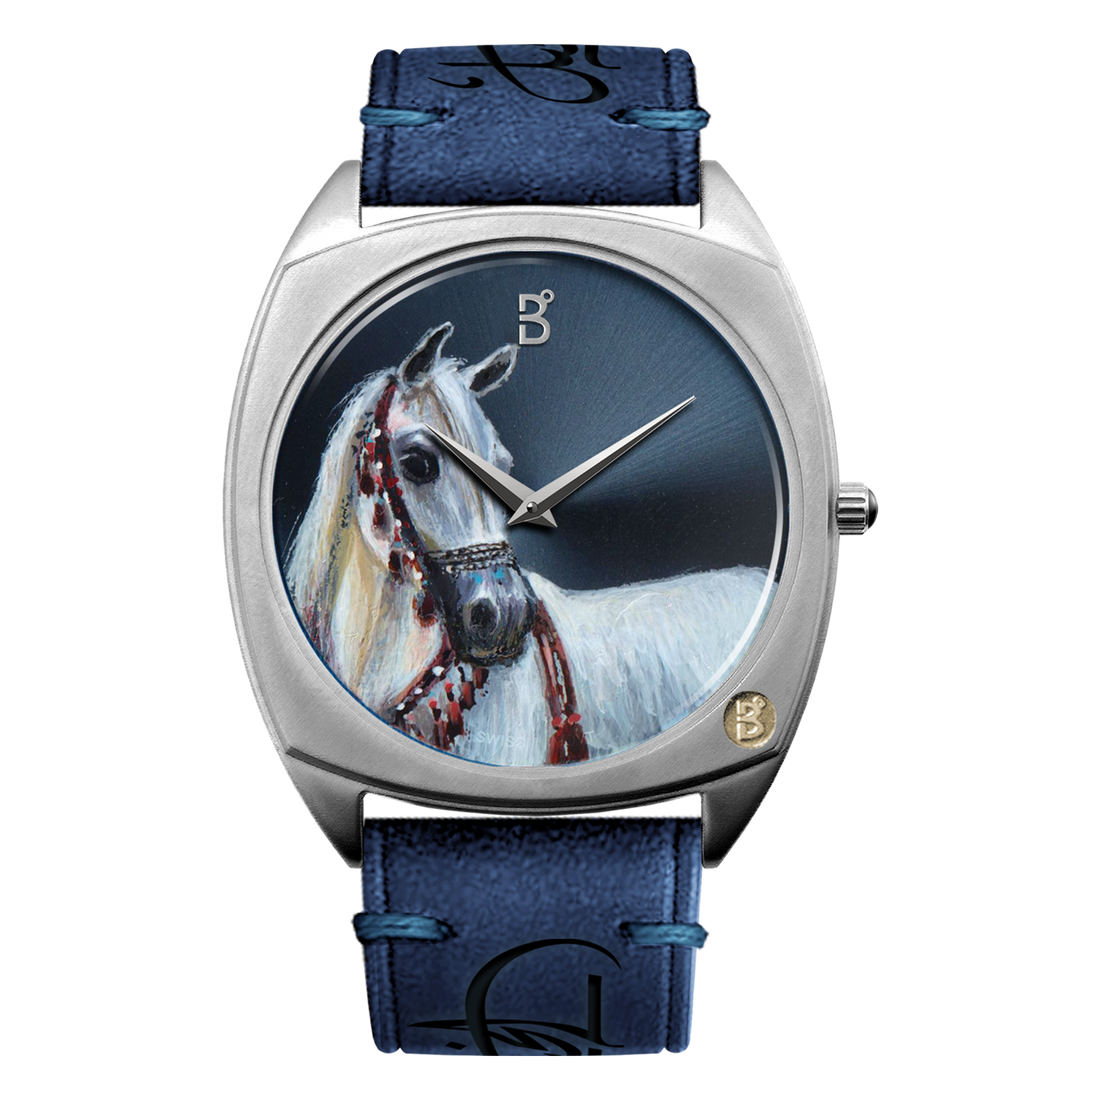 B360-Watches-We have created over 70 hand-painted watches, one for each horse. Each watch comes with a signed certificate by our artists and is marked as 1 out of 1. Check out our Arabian Horses collections.  B360 Watch